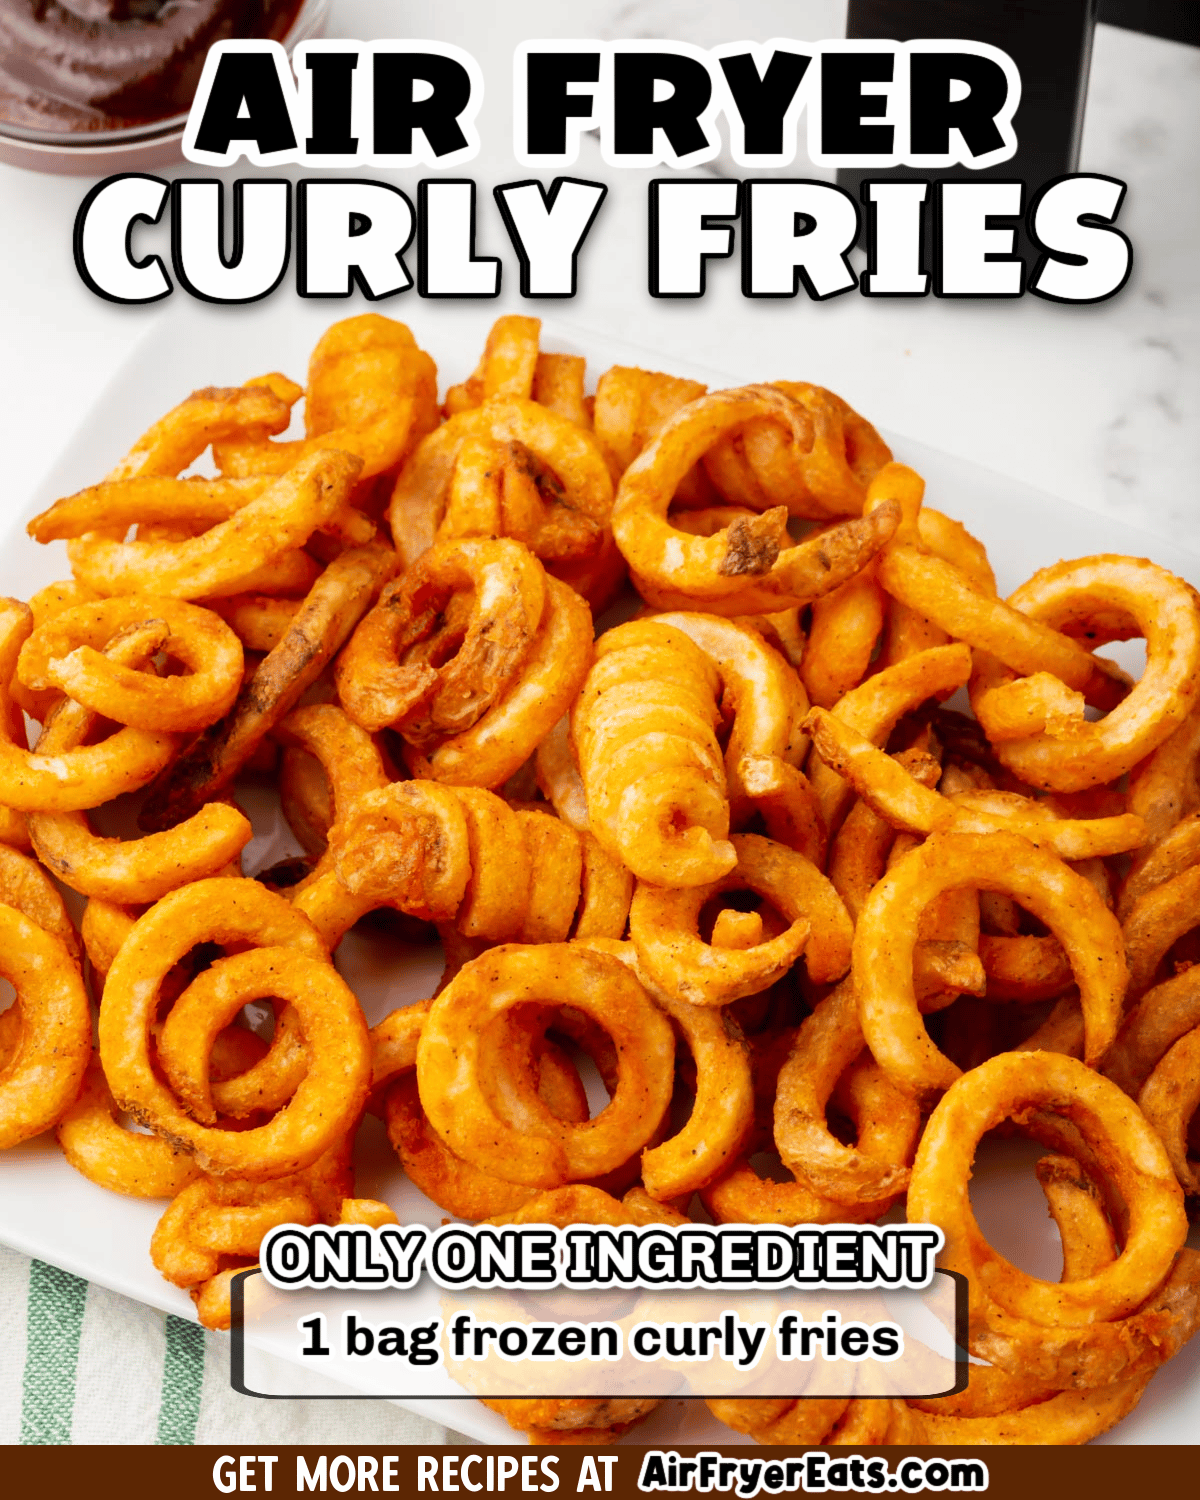 Frozen Curly Fries in the Air Fryer are going to be your new favorite thing! They are so simple to make with these easy air fryer curly fries instructions. via @vegetarianmamma